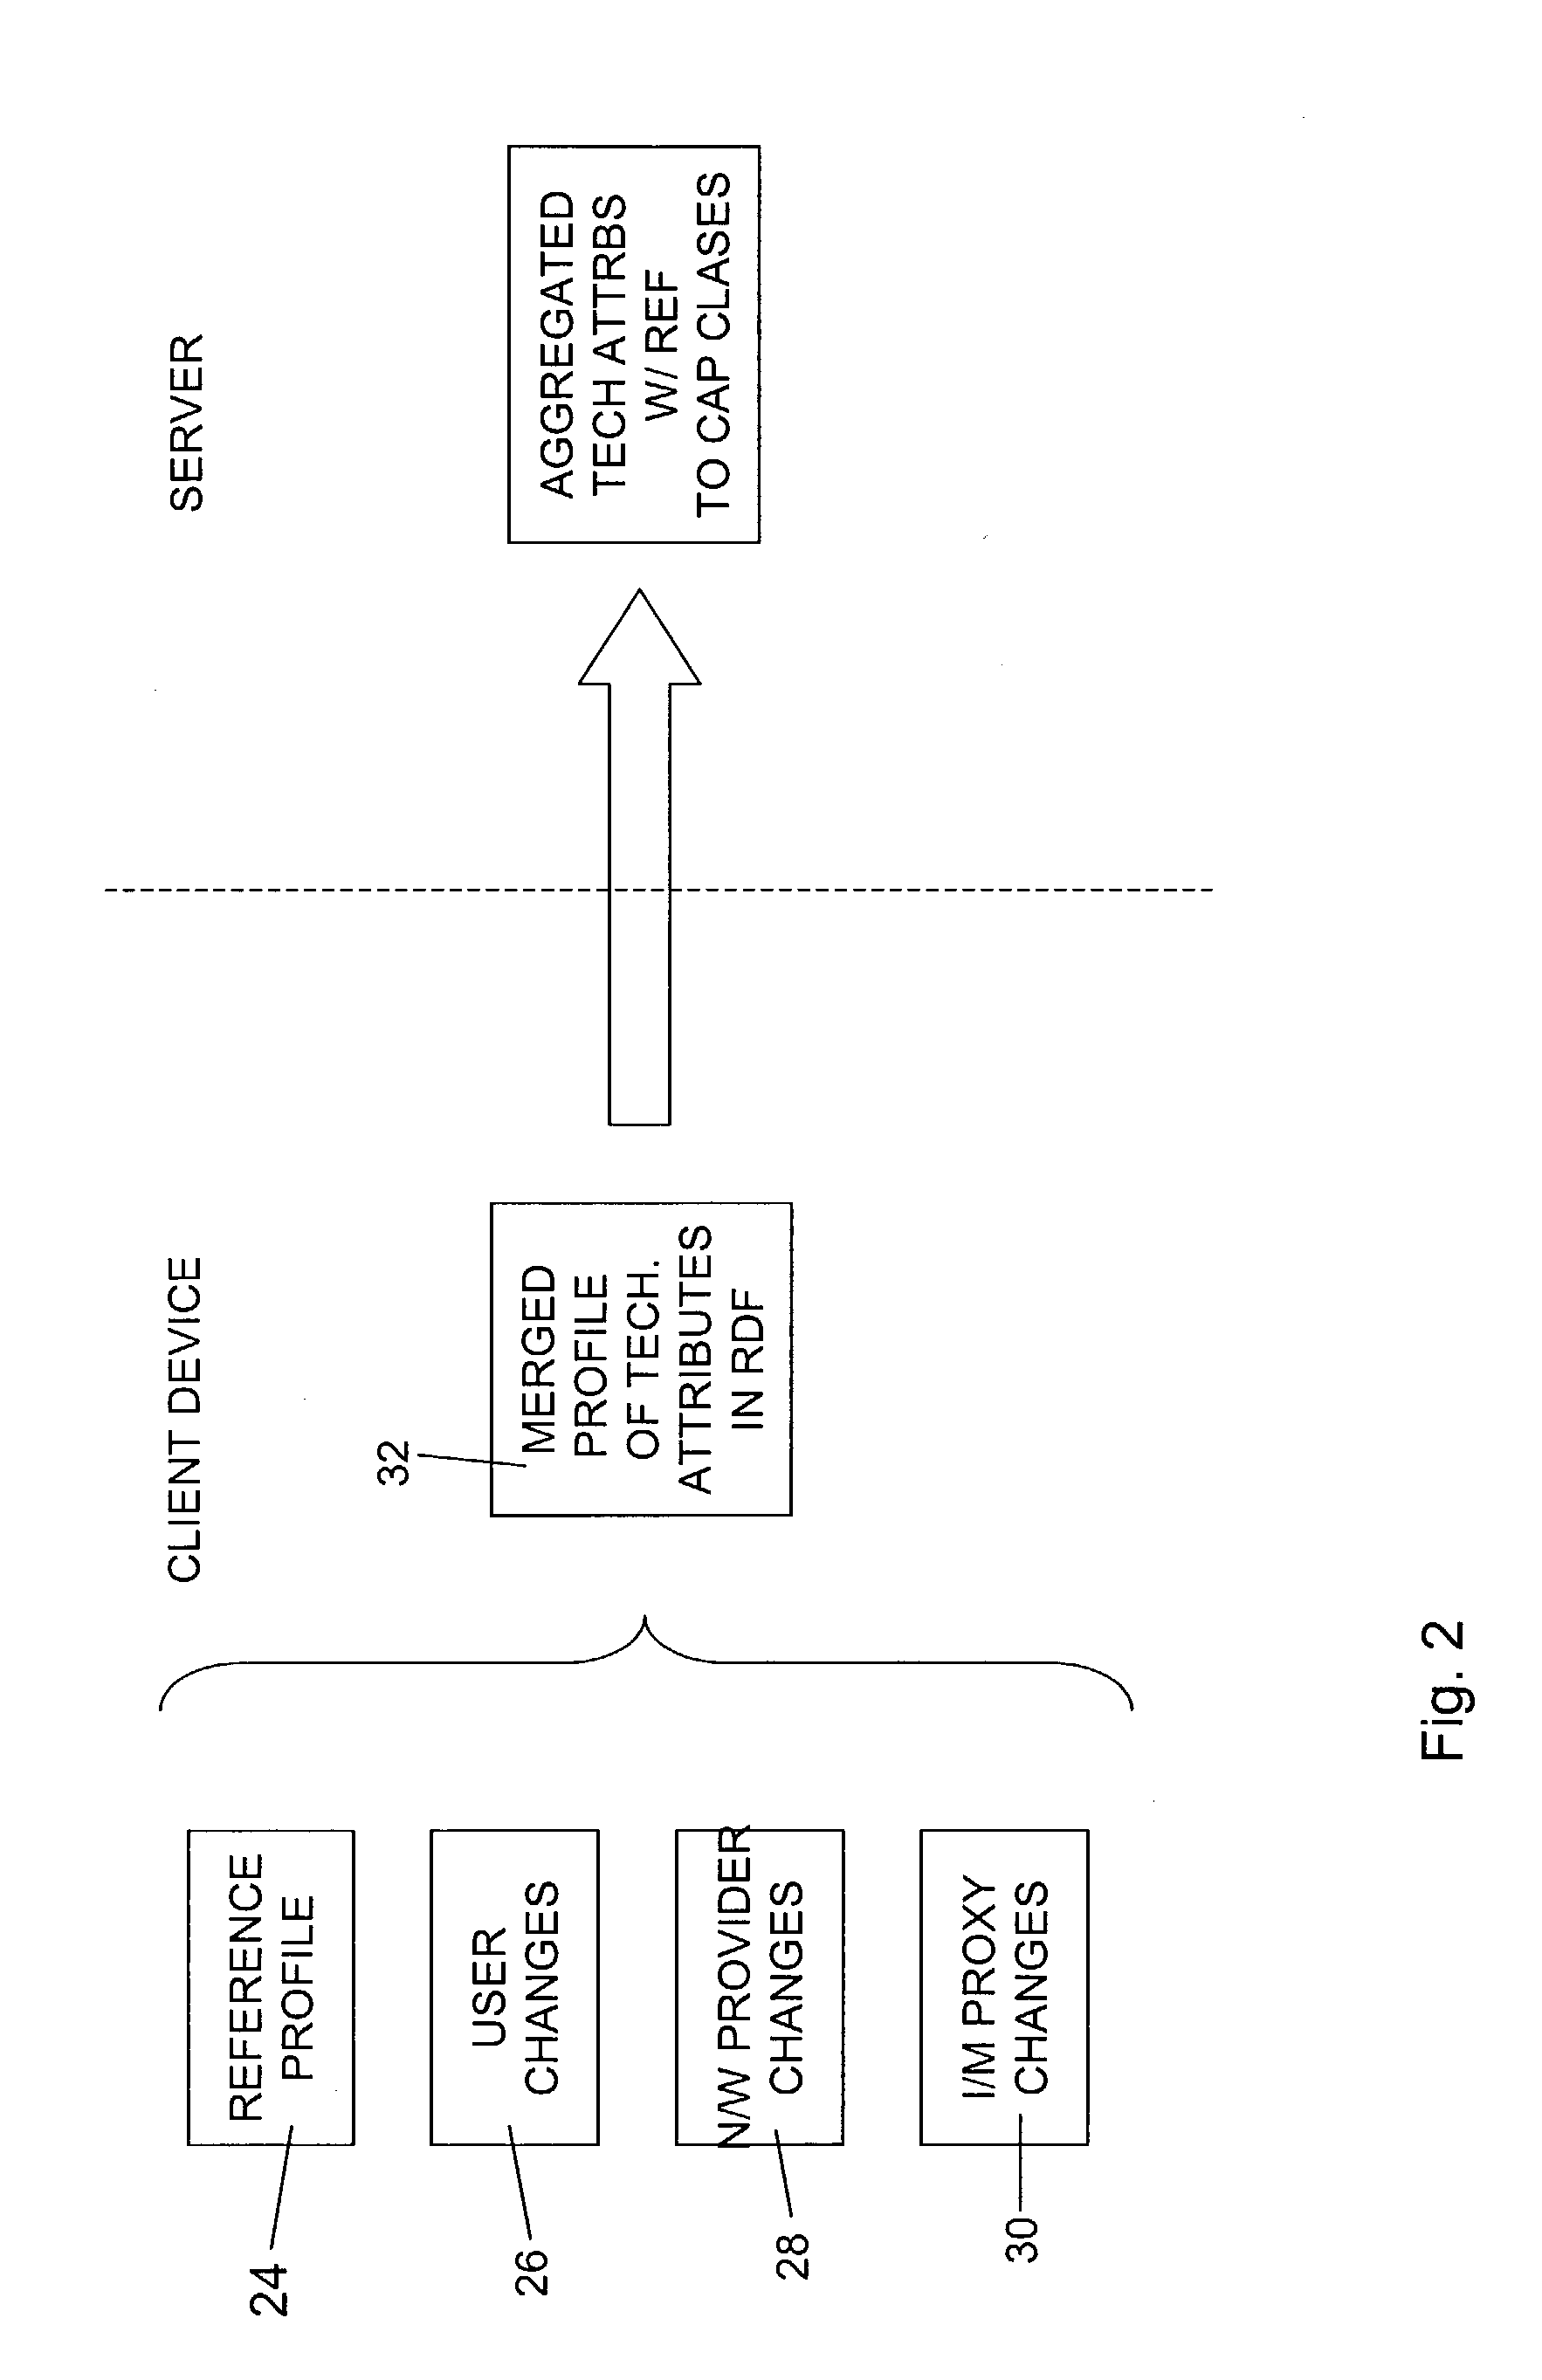 Provision of content to a client device